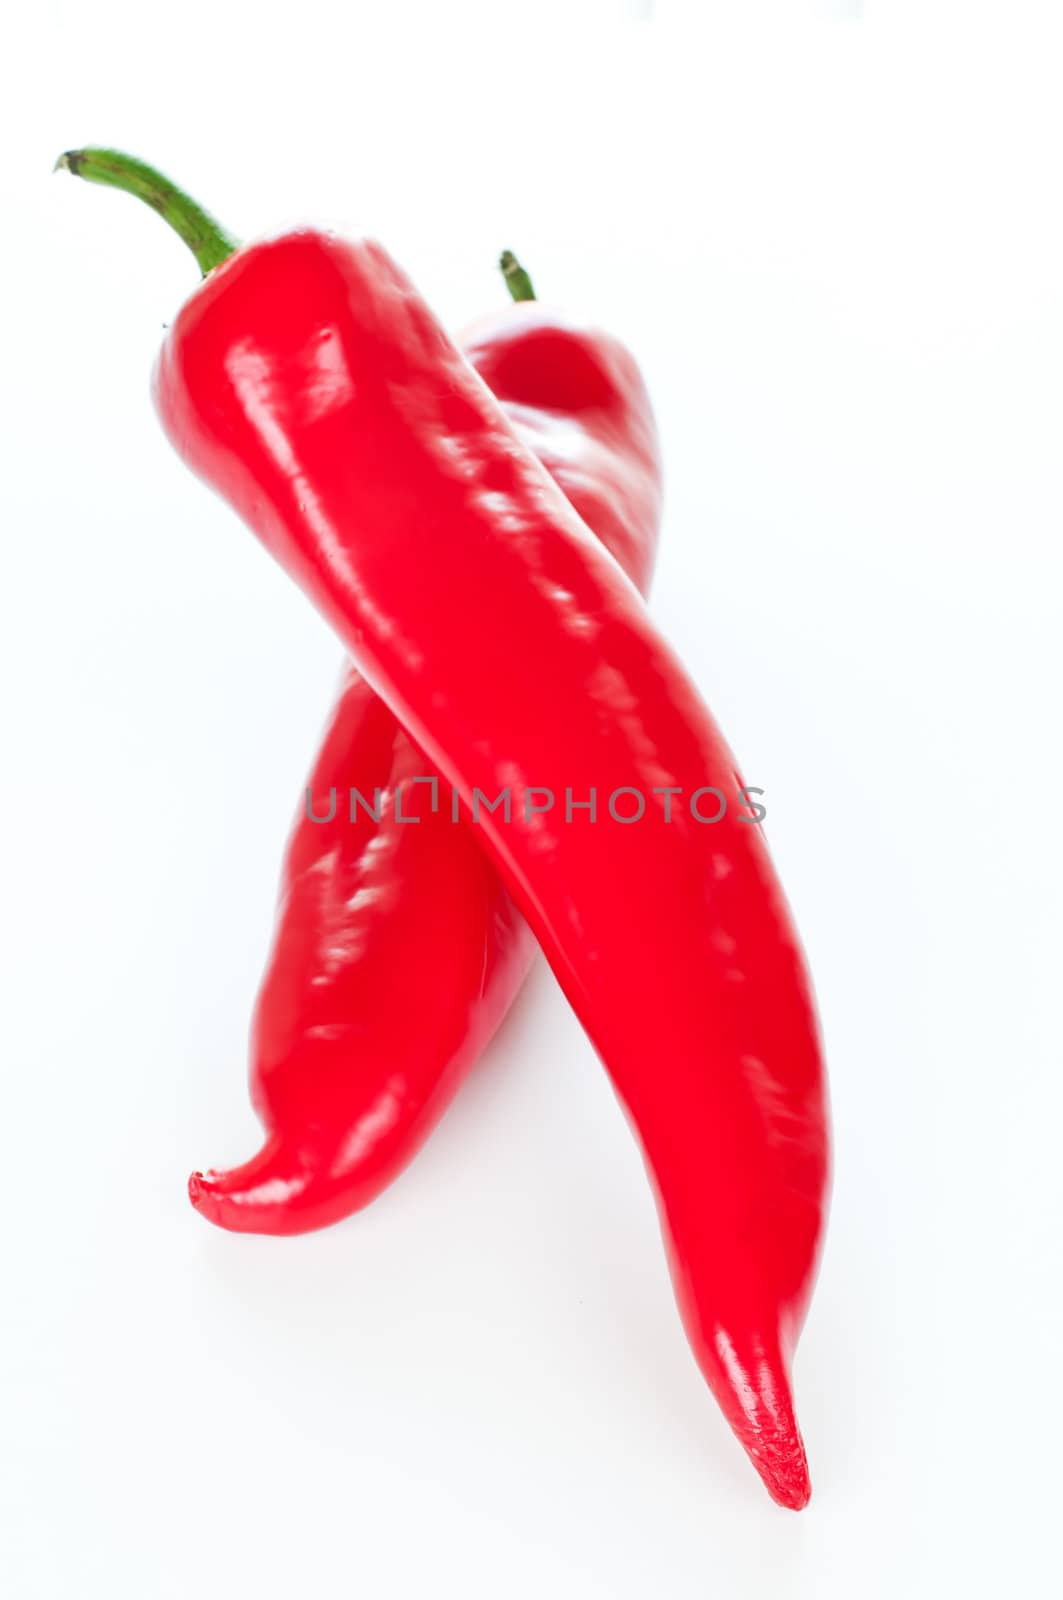 Paprika peppers on white background by Nanisimova